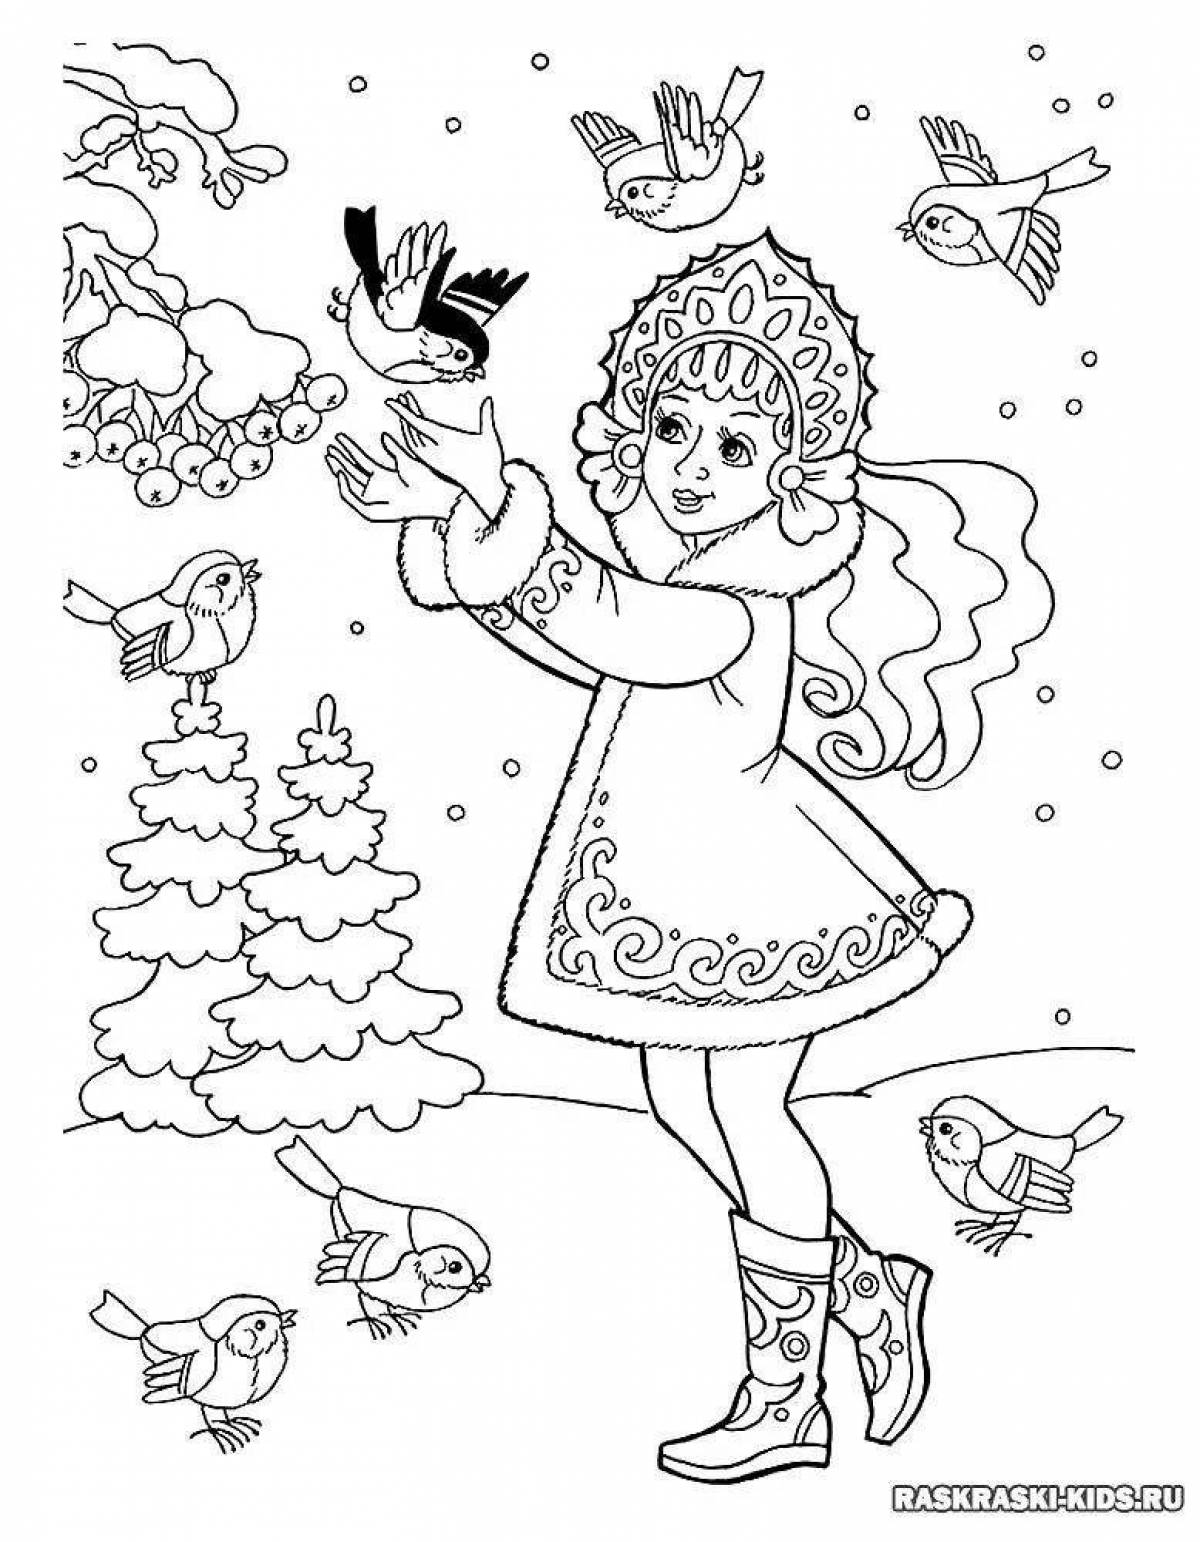 Merry coloring drawing of a winter fairy tale